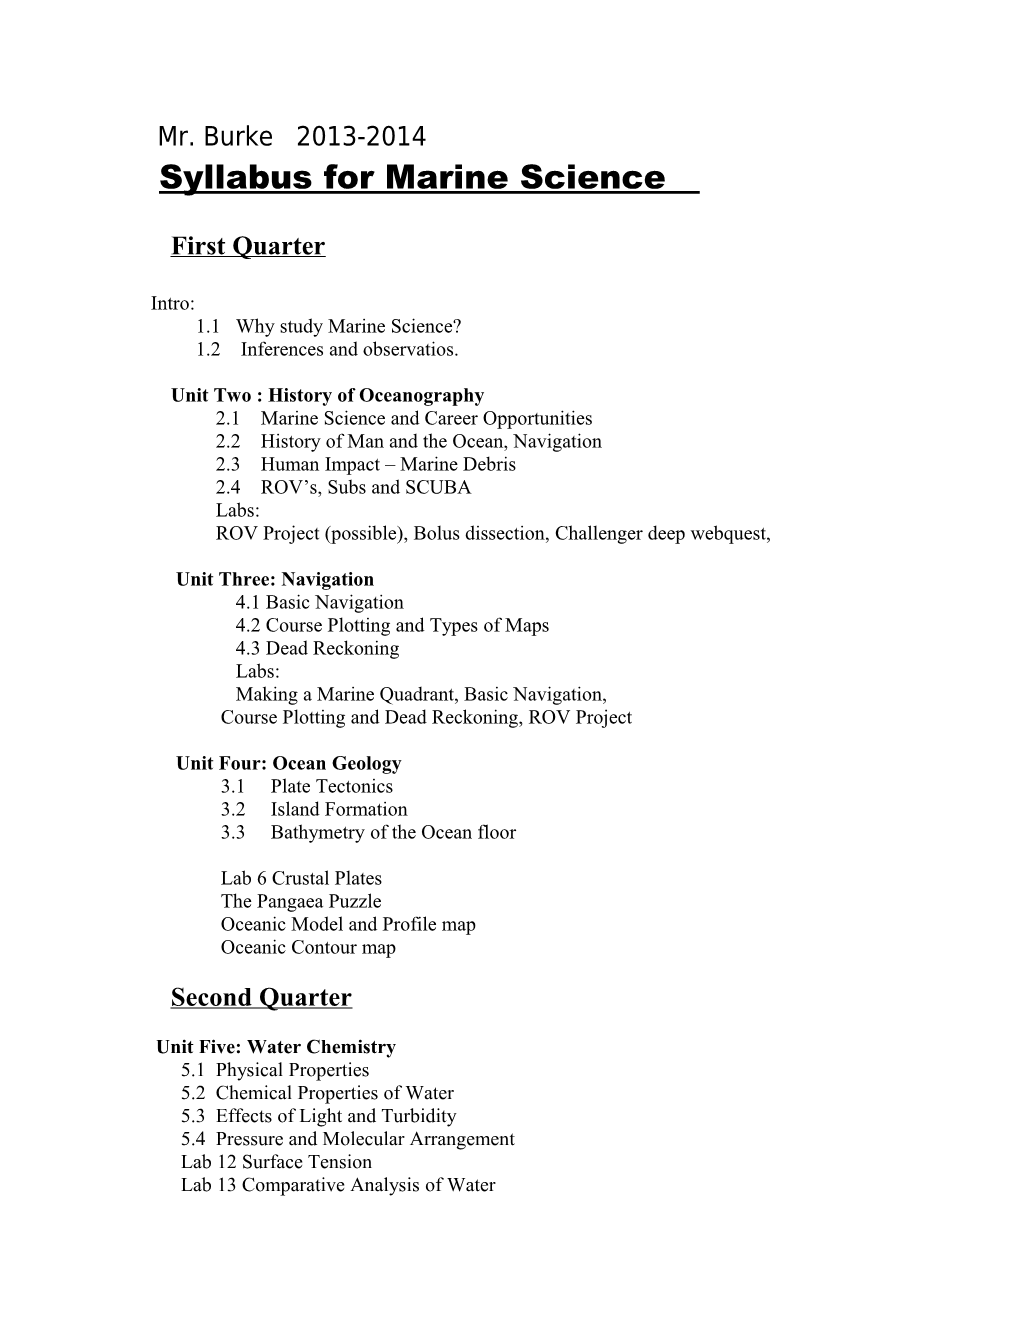 Syllabus Outline For Maine Science 1314